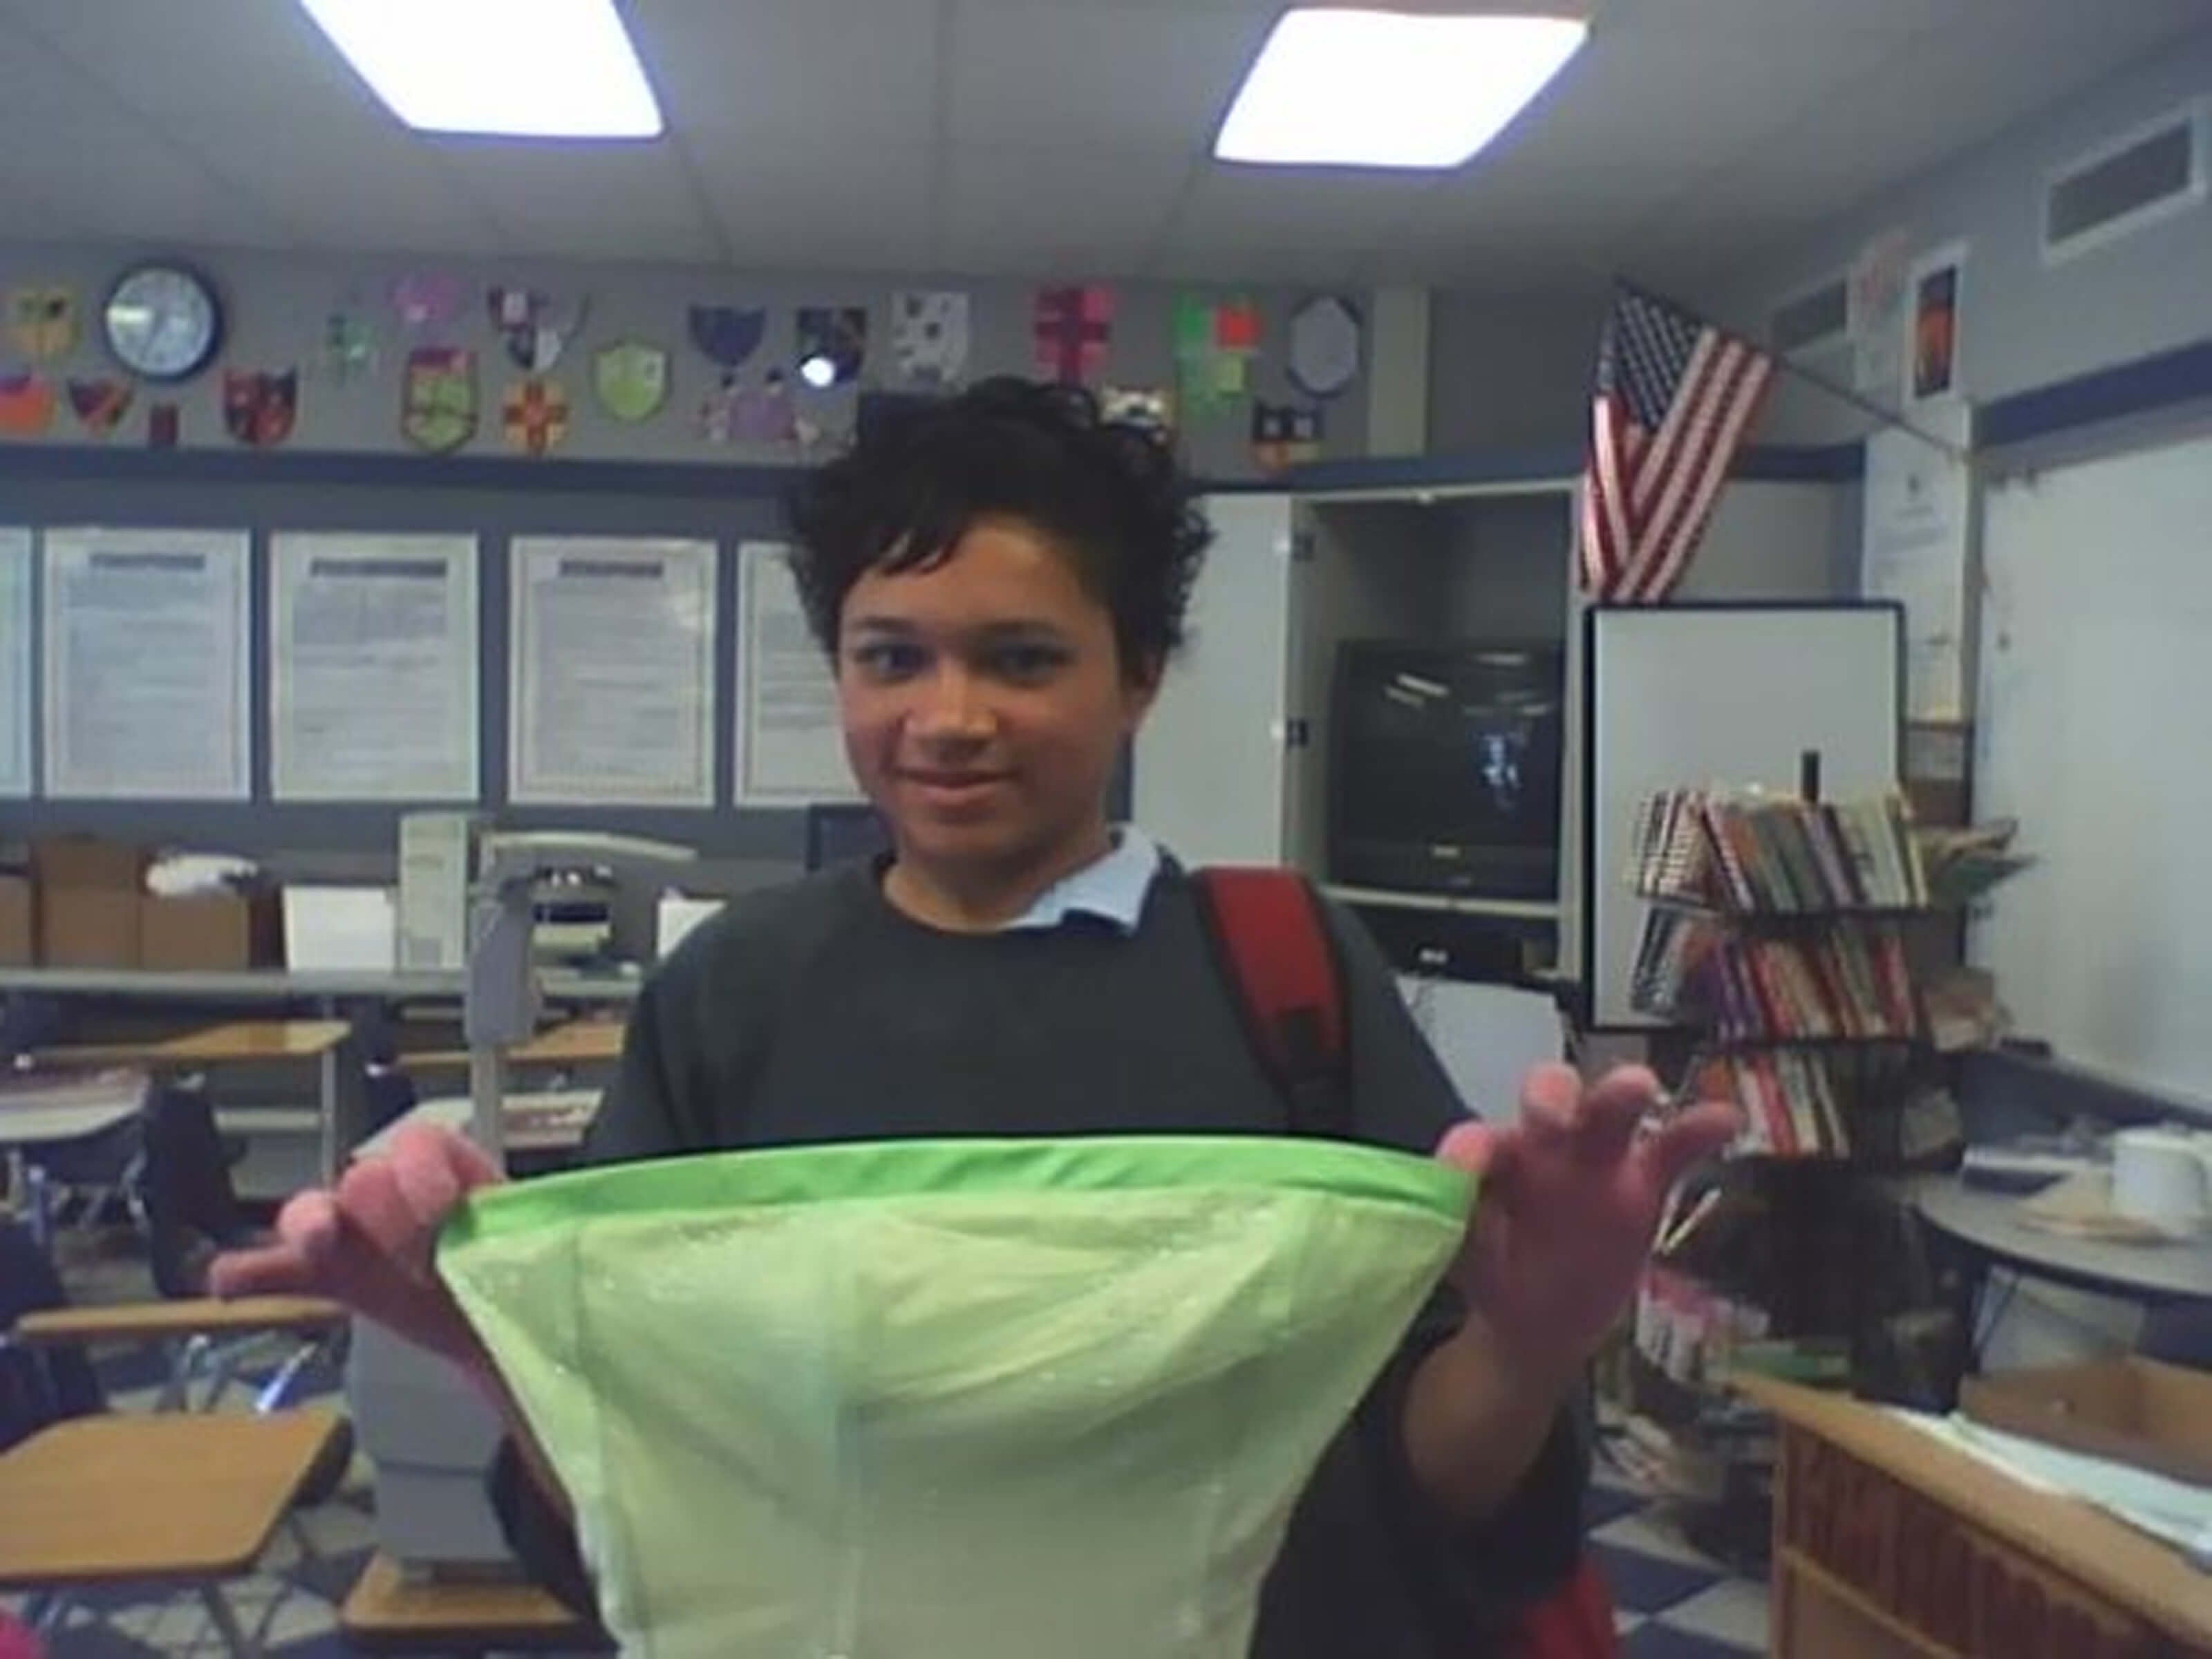 Still from Valentine Road. A young person in a classroom is holding the bodice of a green dress up, smiling at the camera.